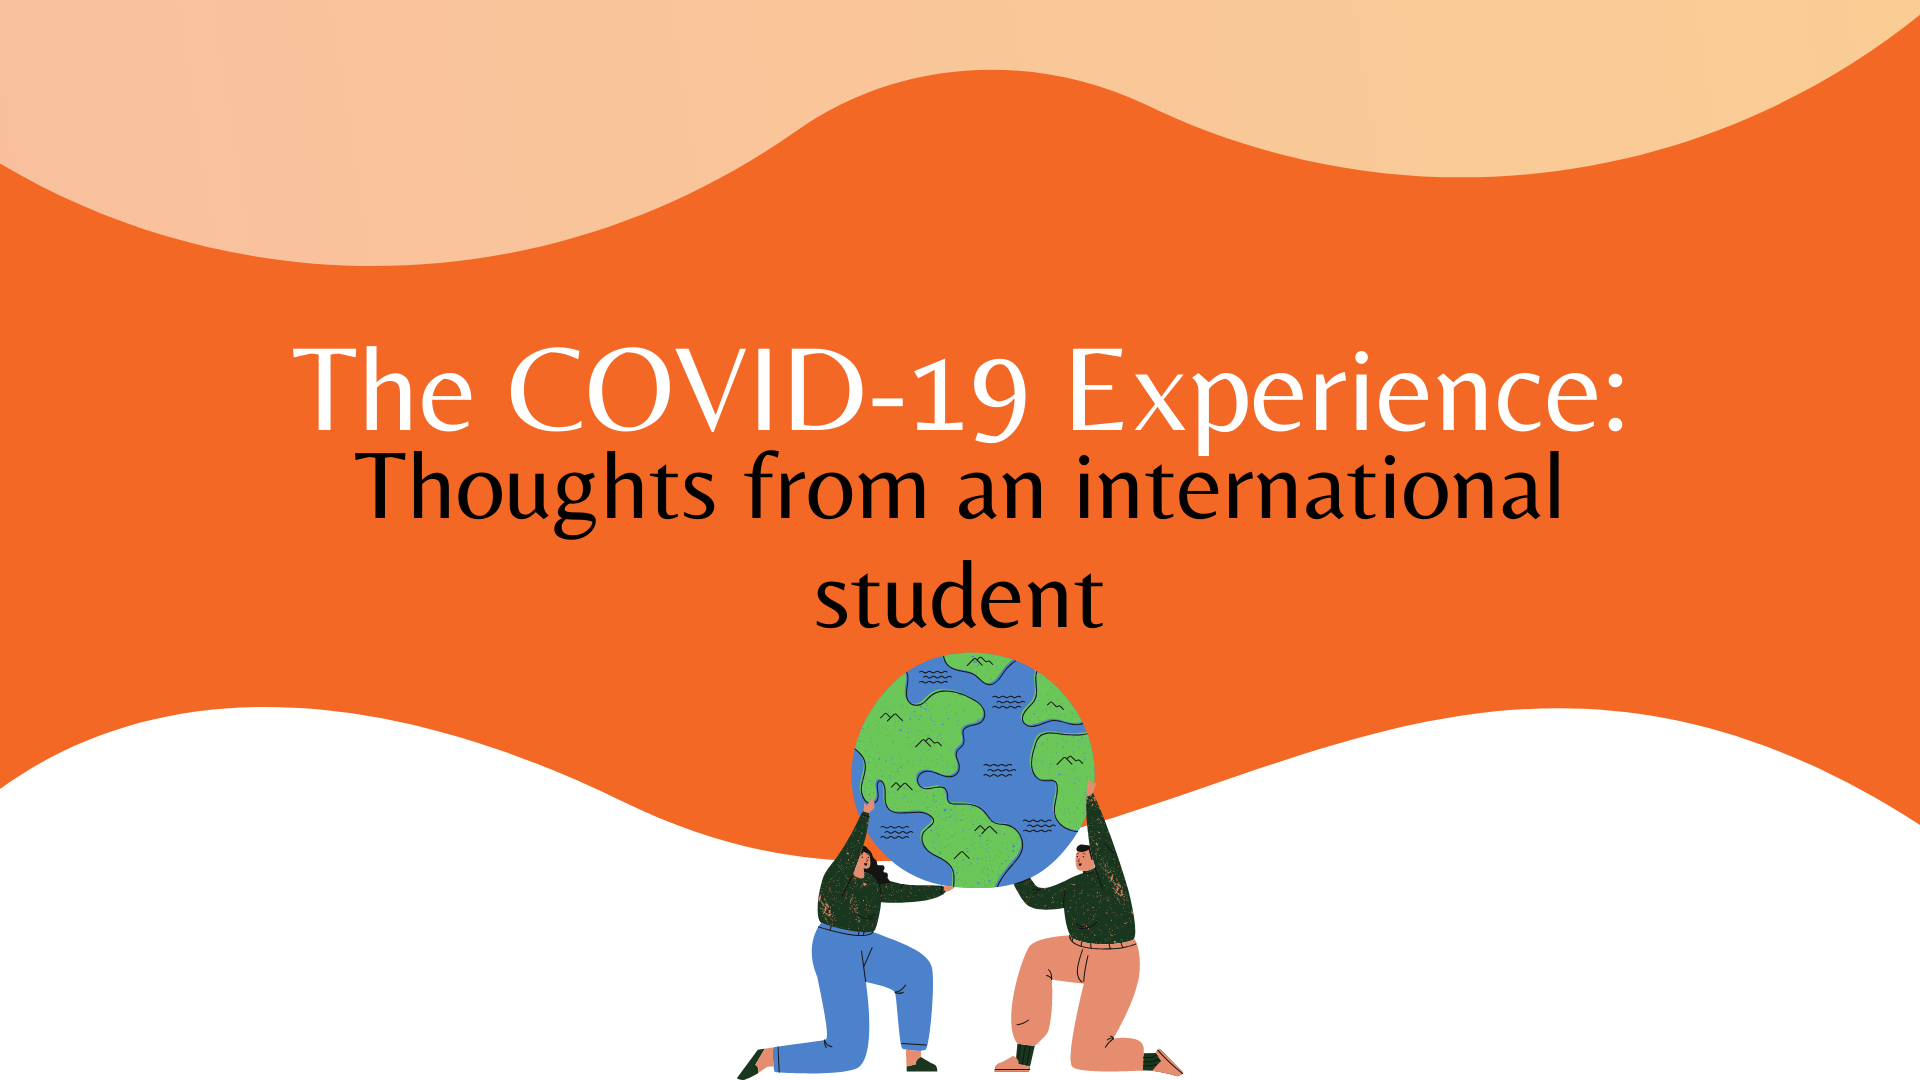 an-international-students-thoughts-on-the-covid-19-experience-1gch8mec4y_csipdinpqcqg.png